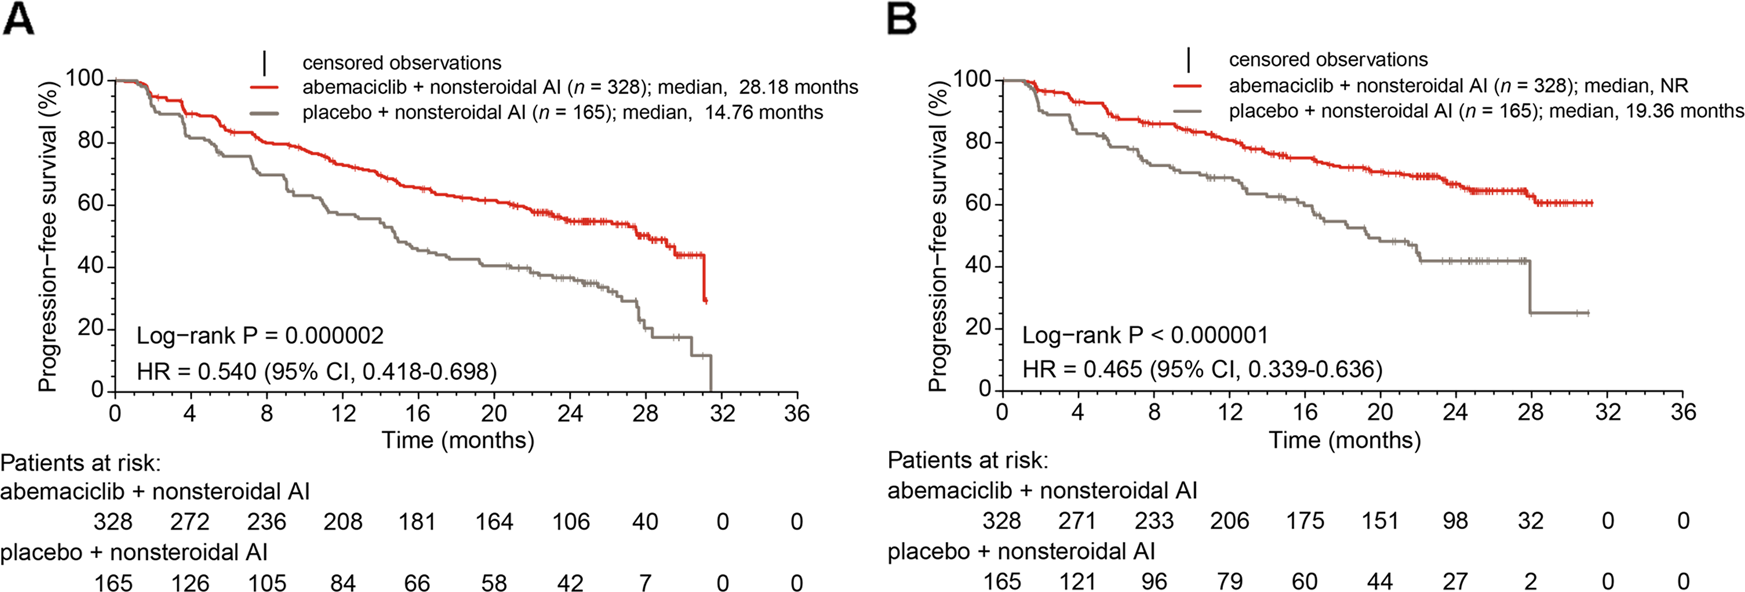 MONARCH 3 final PFS: a randomized study of abemaciclib as initial therapy  for advanced breast cancer | npj Breast Cancer